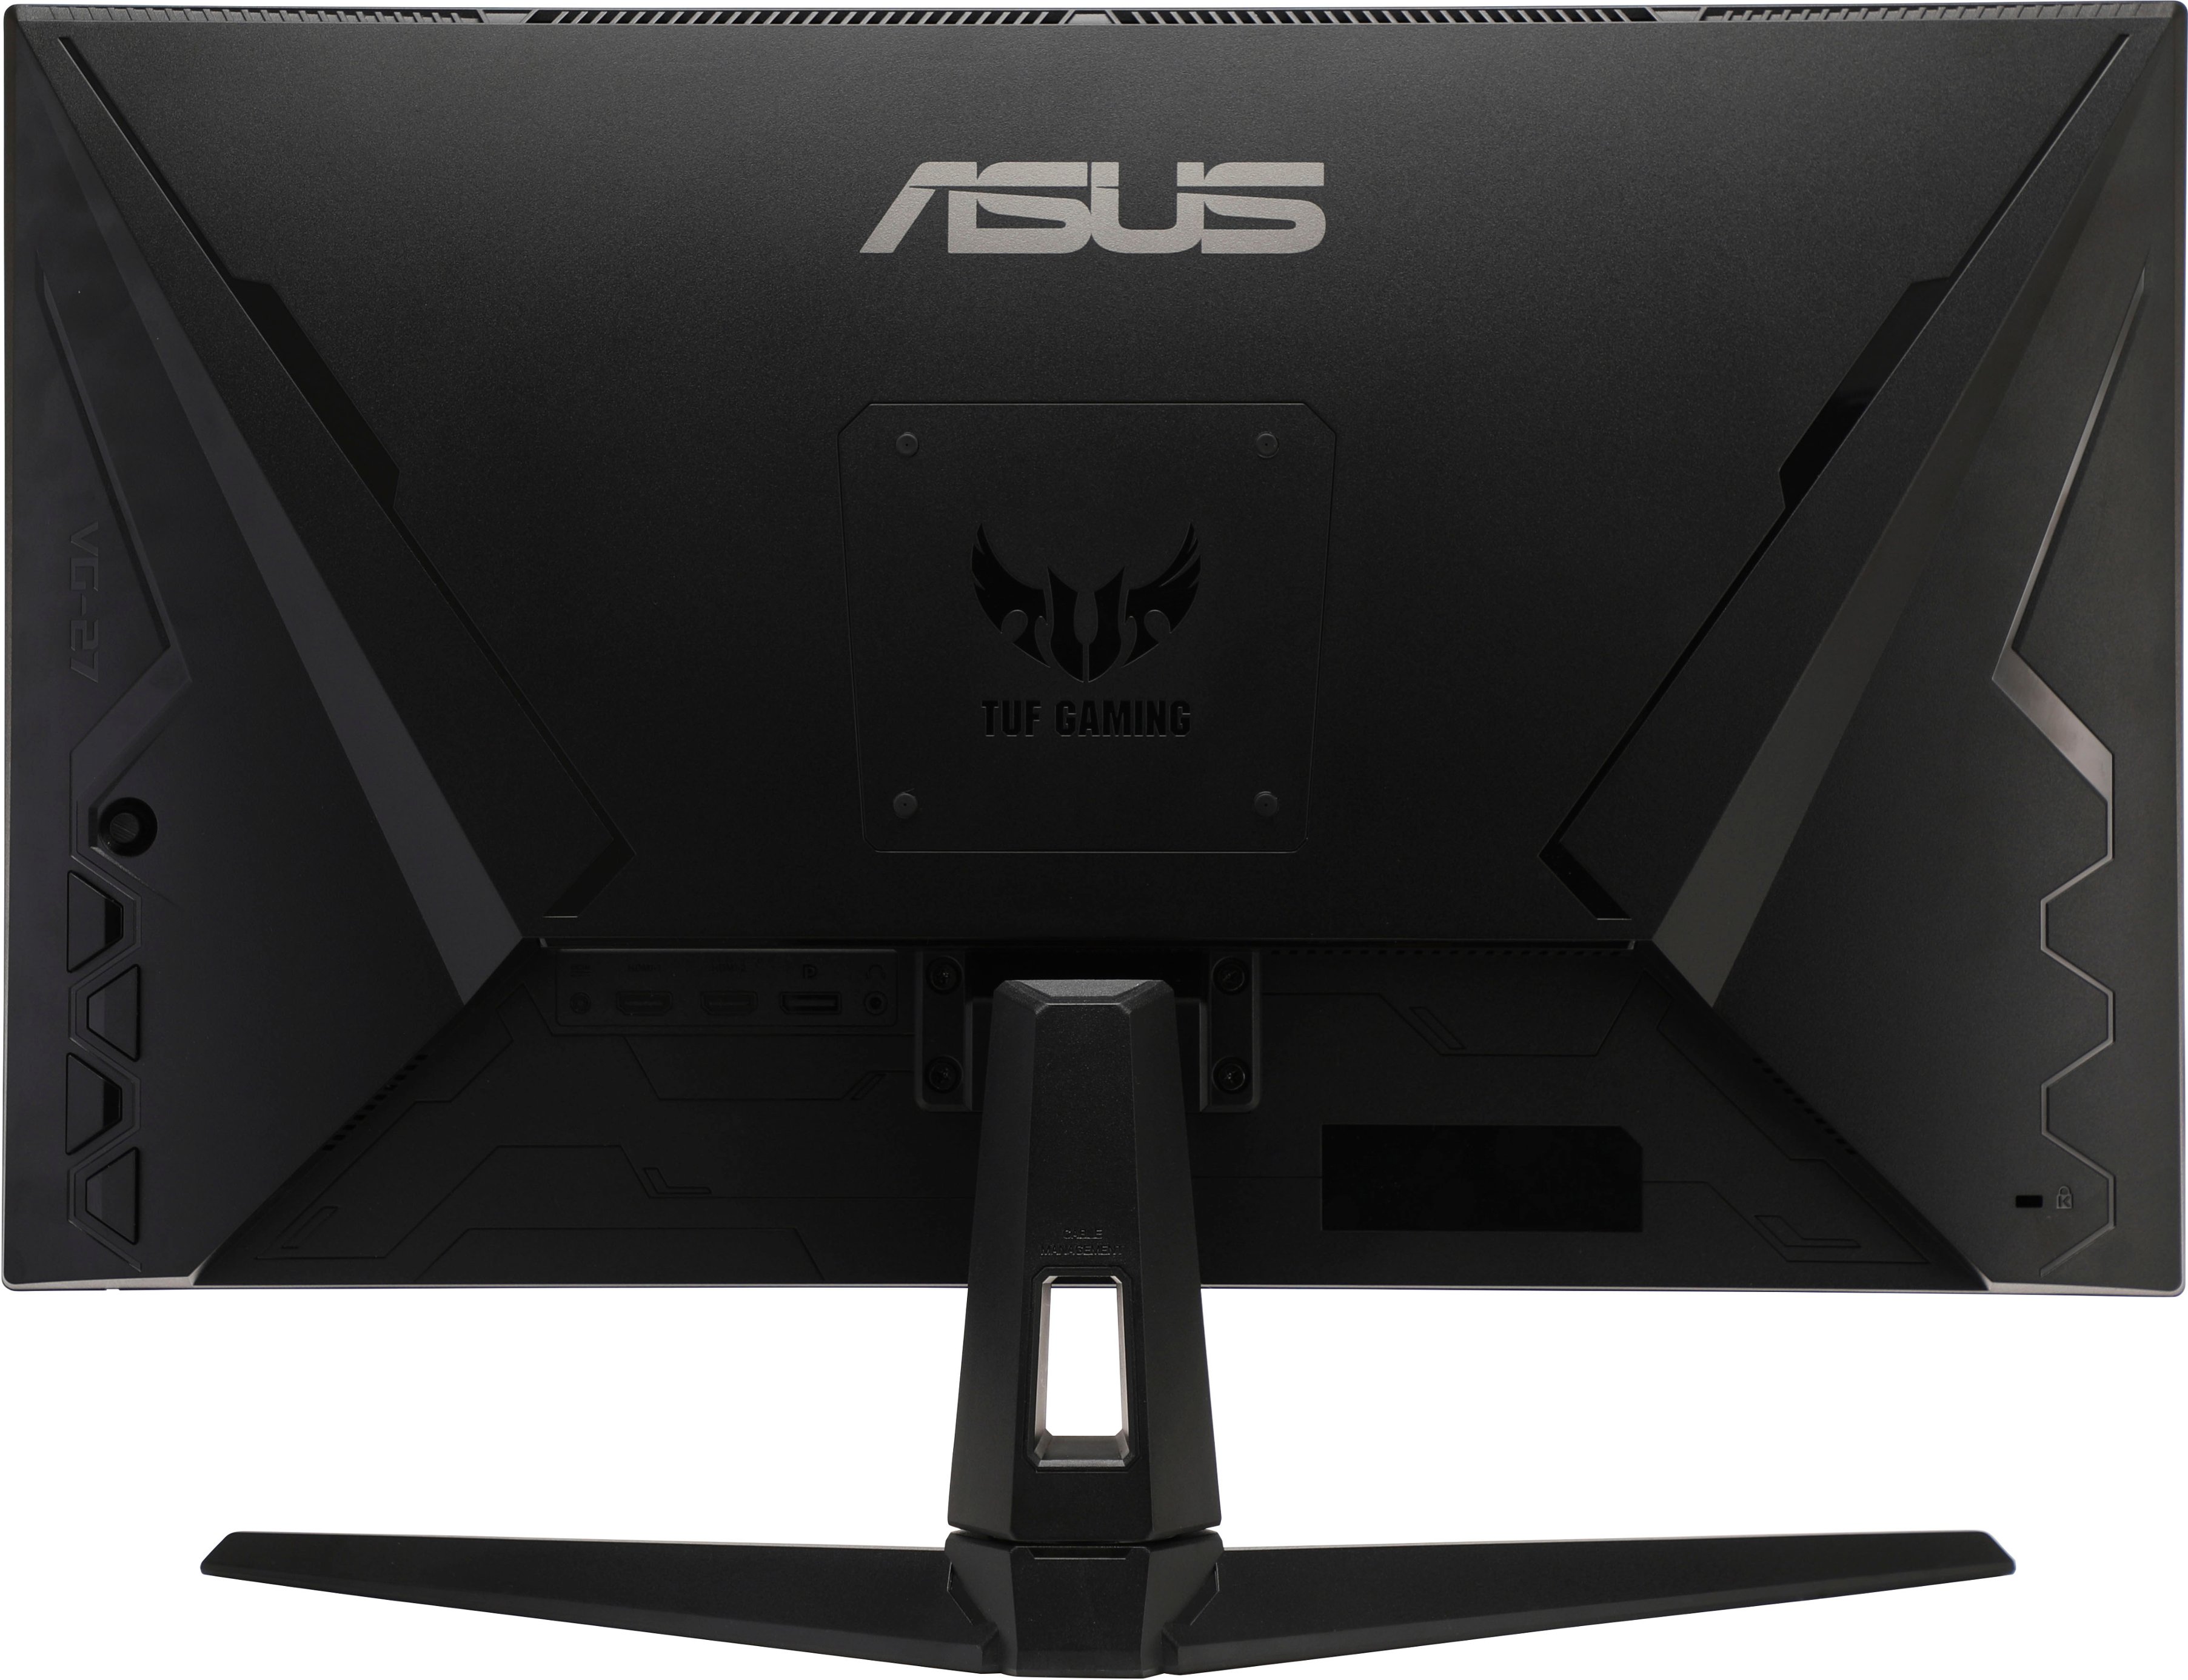 ASUS TUF Gaming 27” Curved FHD Gaming Monitor, 1080P Full HD, 165Hz  (Supports 144Hz), Extreme Low Motion Blur, Adaptive-sync, FreeSync Premium,  1ms